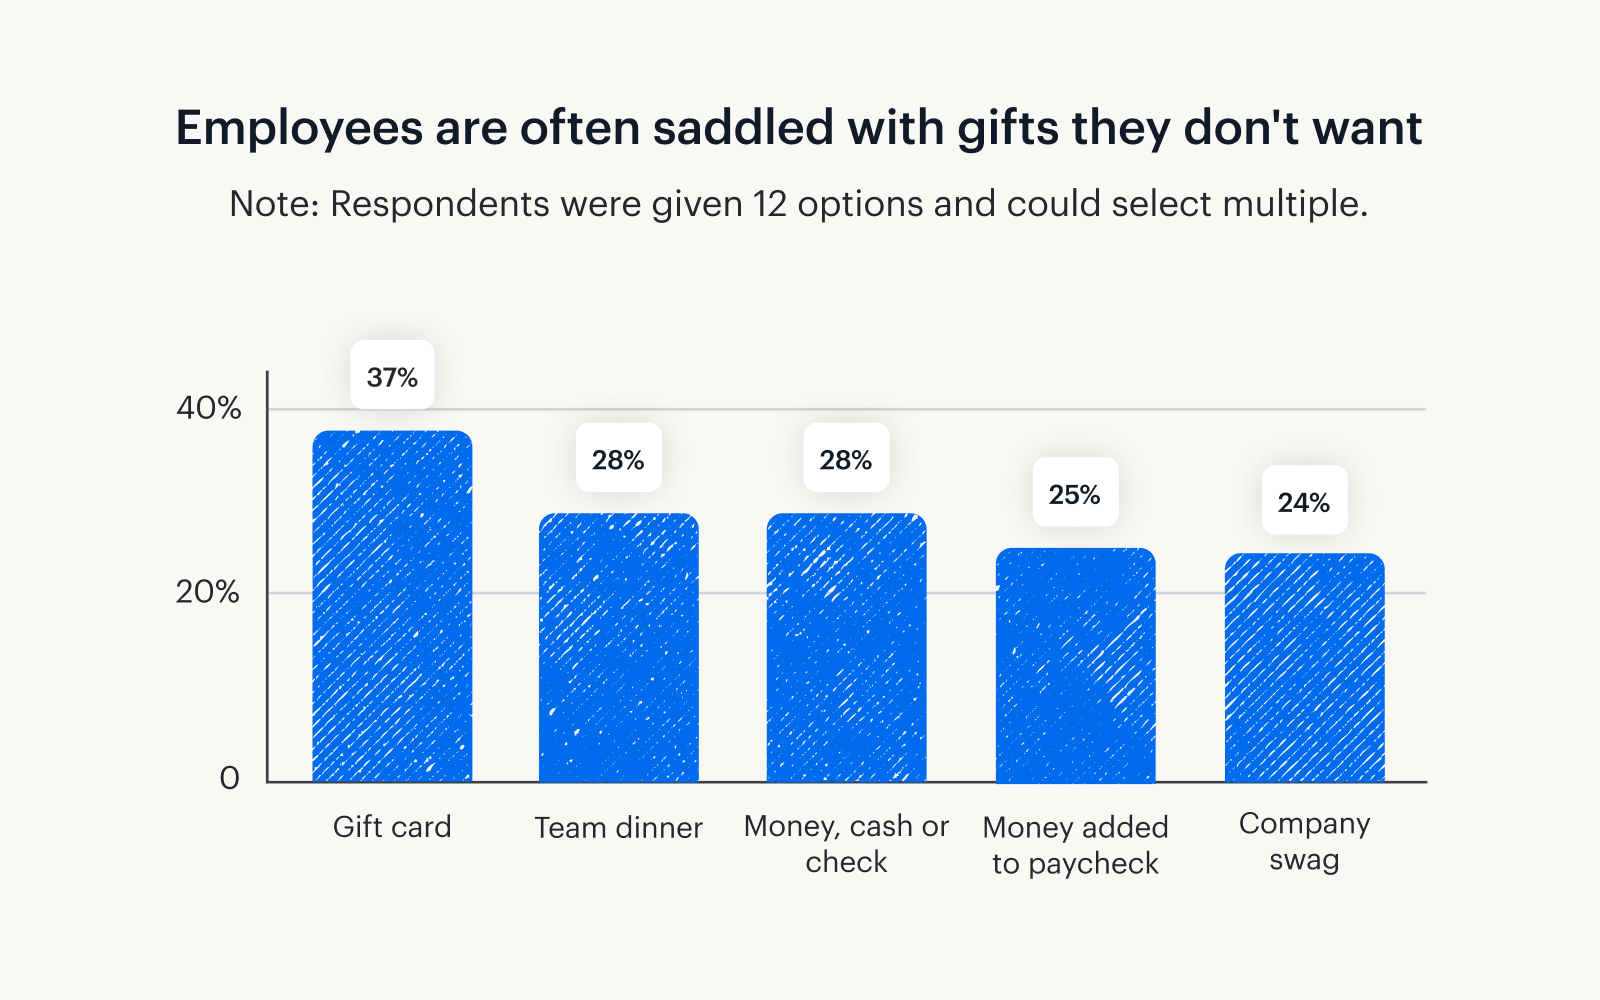 A bar graph showing that employees are often saddled with gifts they don't want.